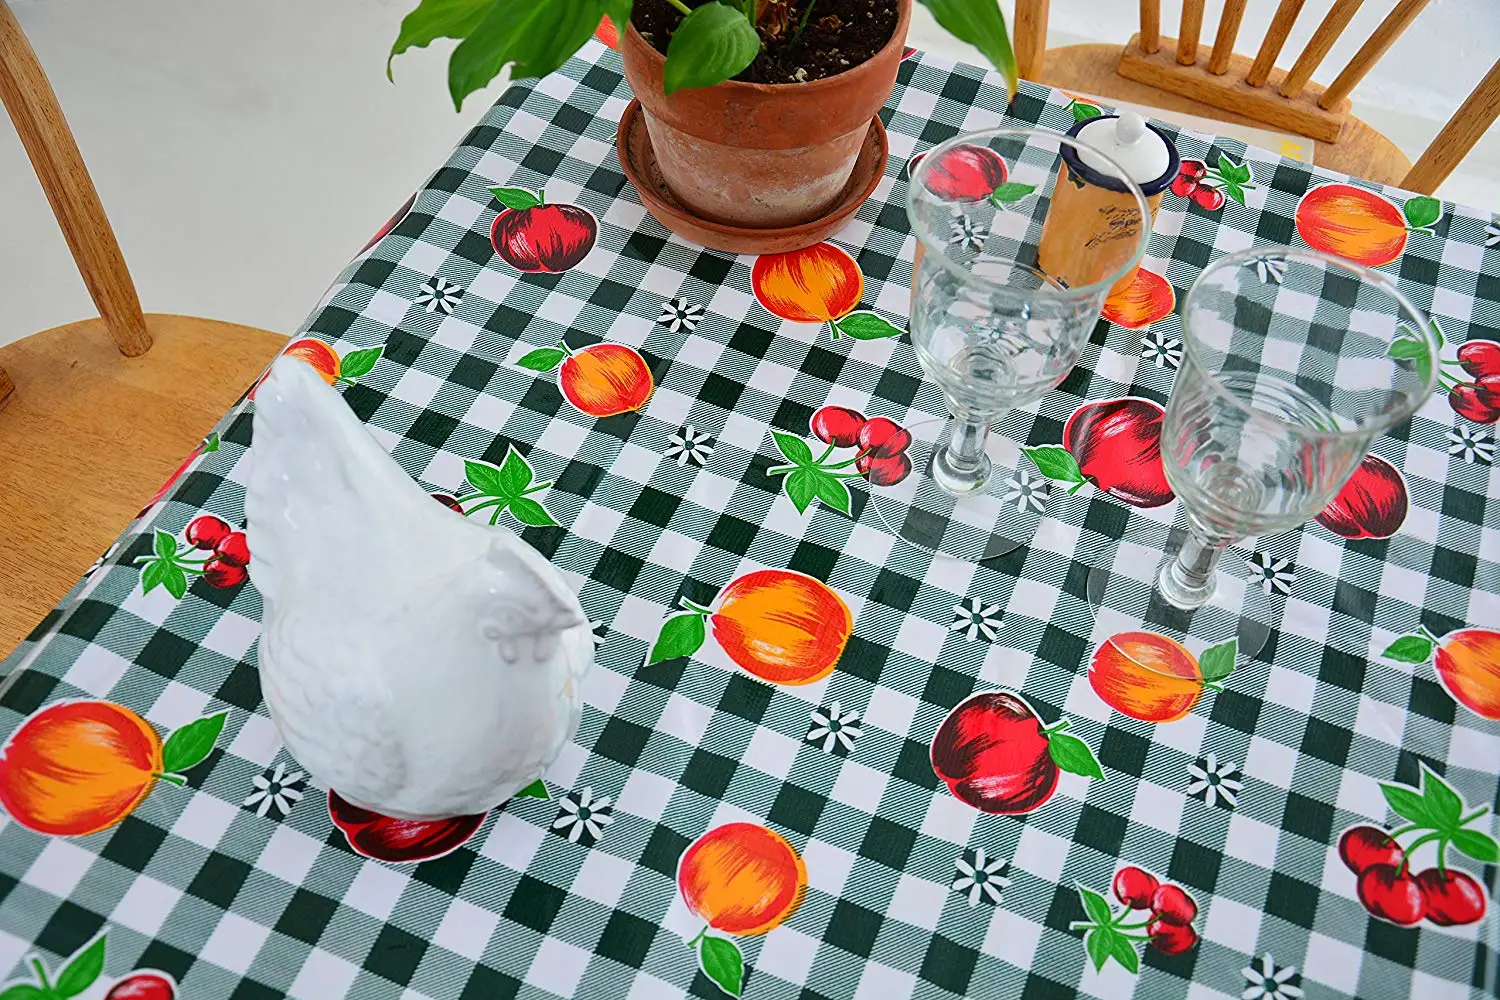 Custom oilcloth tablecloth oval Cheap Oilcloth Tablecloth Oval Find Deals On Line At Alibaba Com